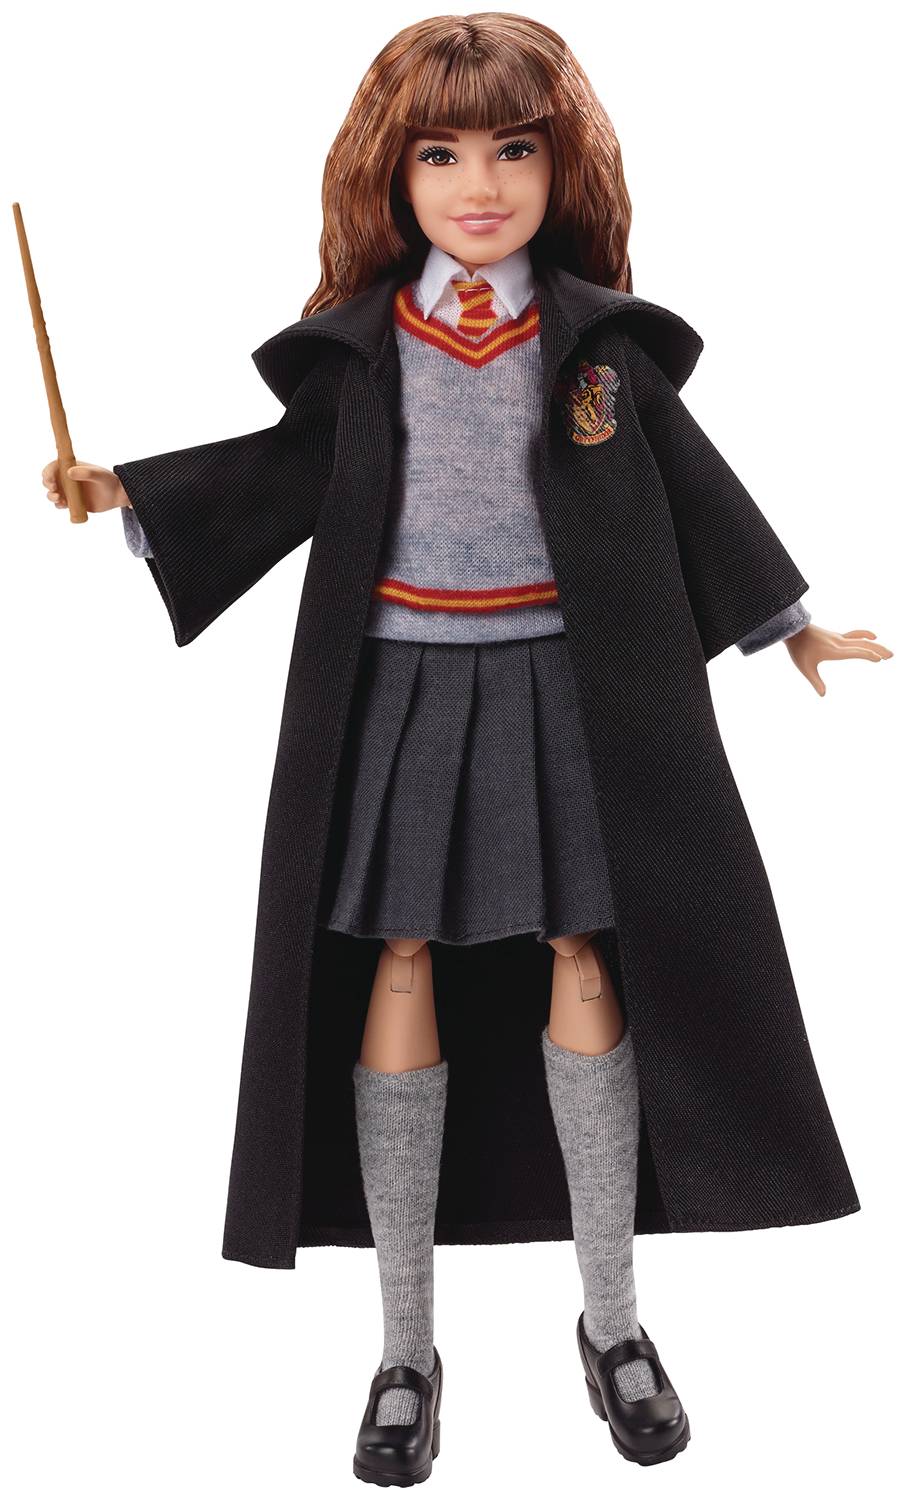 HARRY POTTER COS 7IN SCALE HERMIONE DOLL